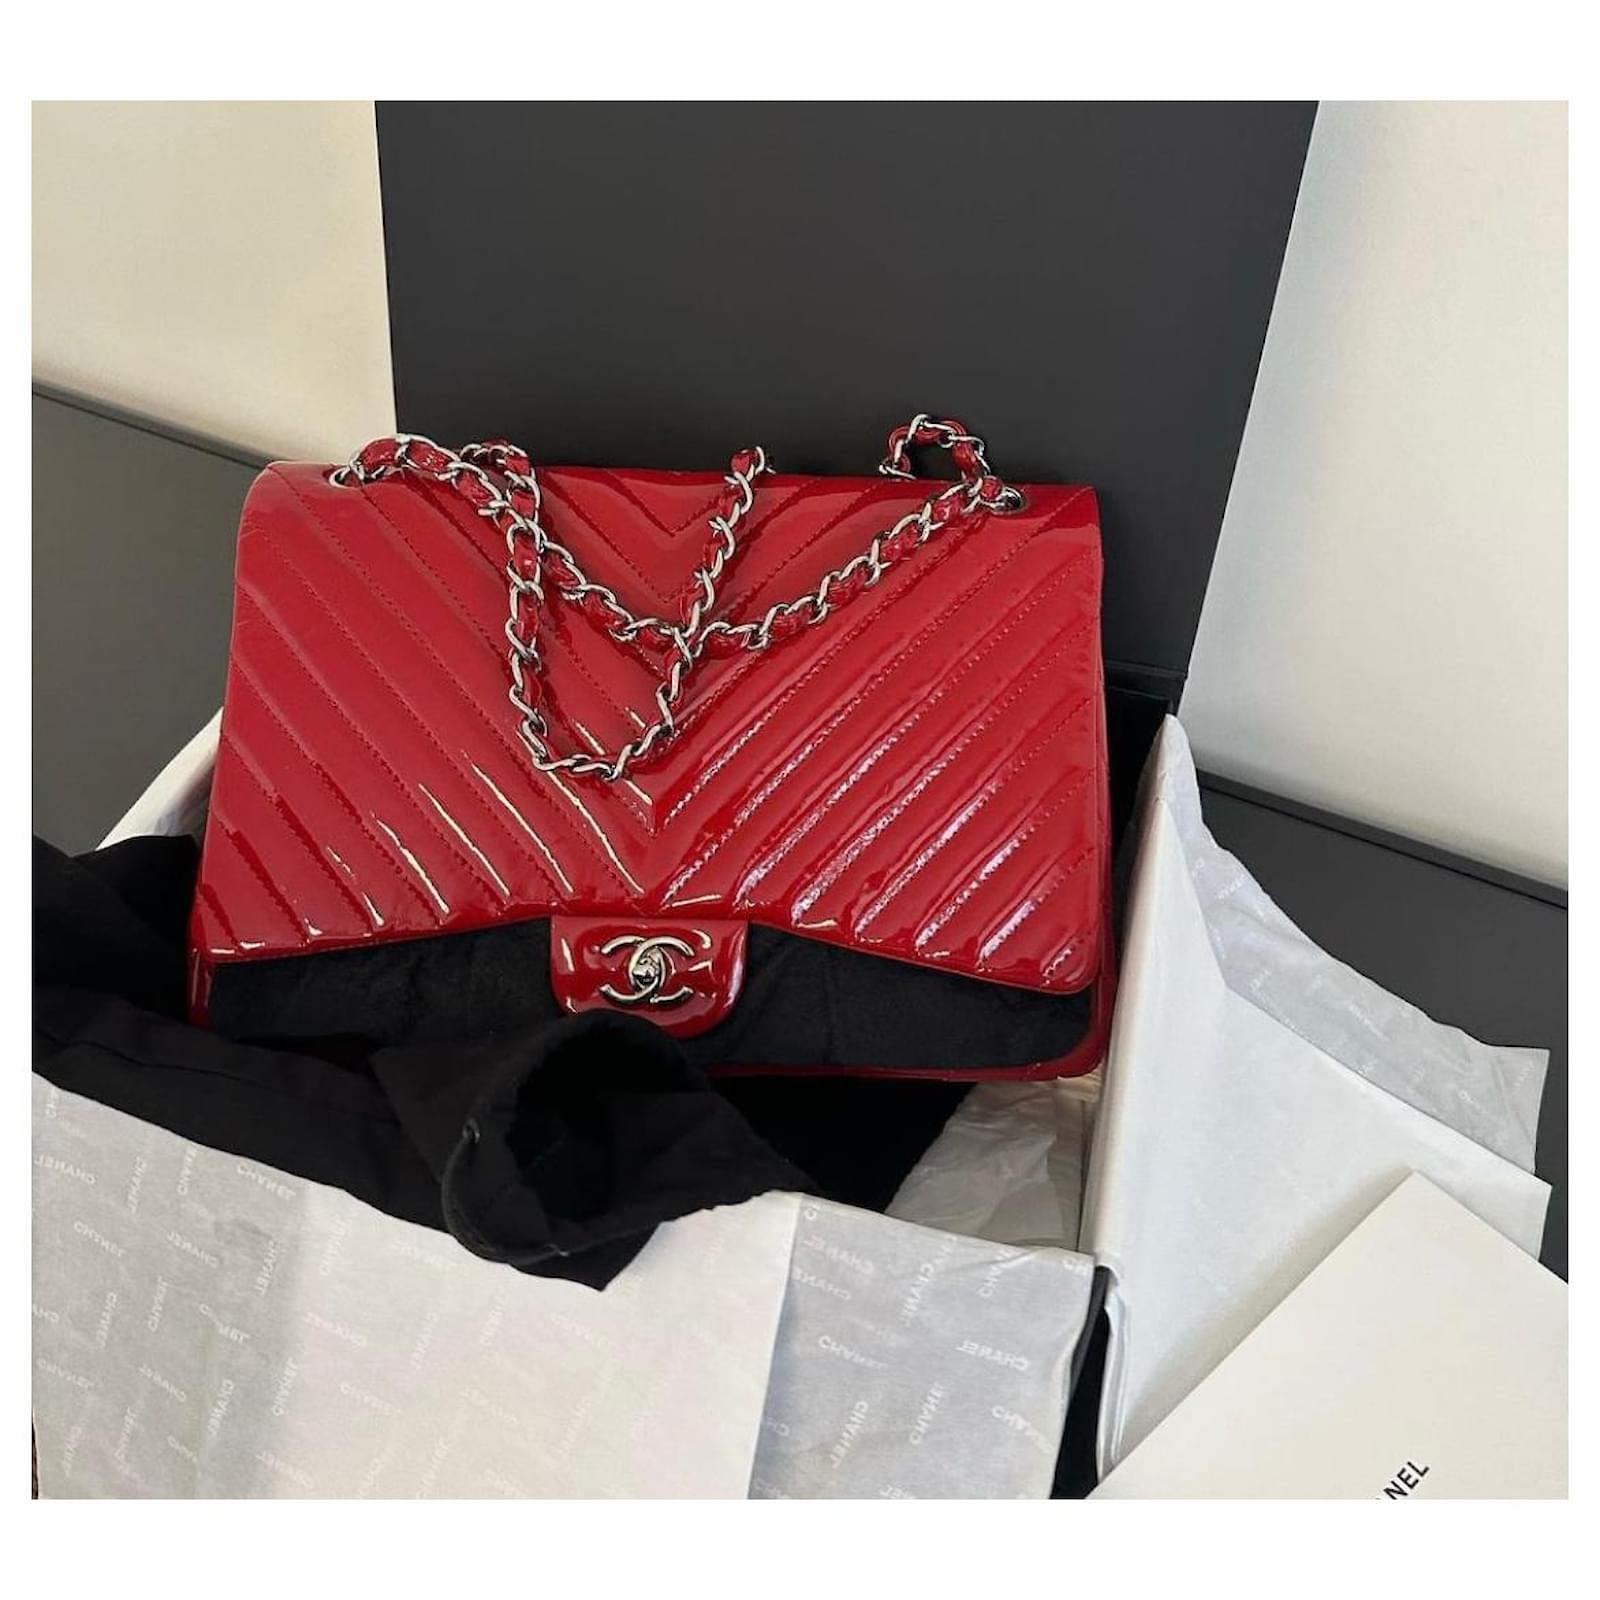 Chanel Red Patent Leather Timeless Classic Maxi Chevron Flap Bag